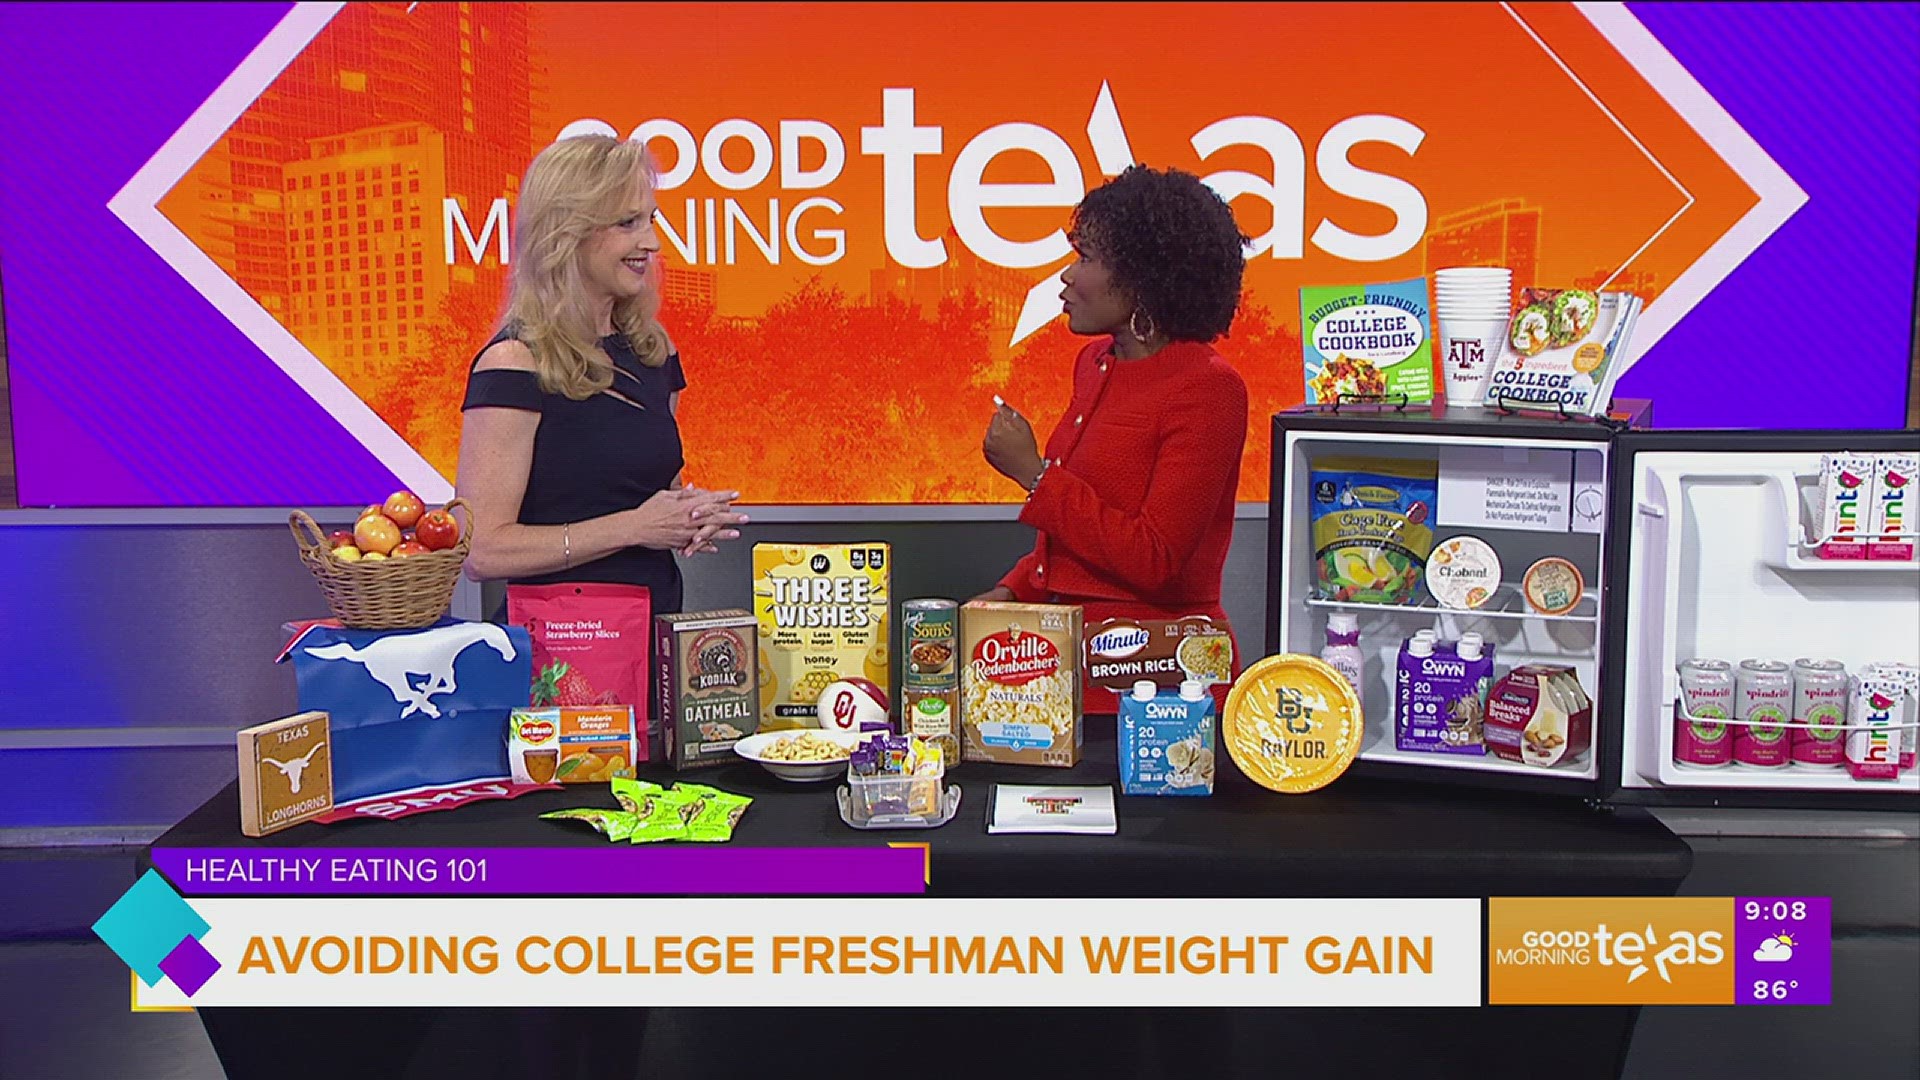 Registered and licensed dietician Meridan Zerner of Cooper Clinic shares her healthy eating tips for college freshmen to help avoid weight gain